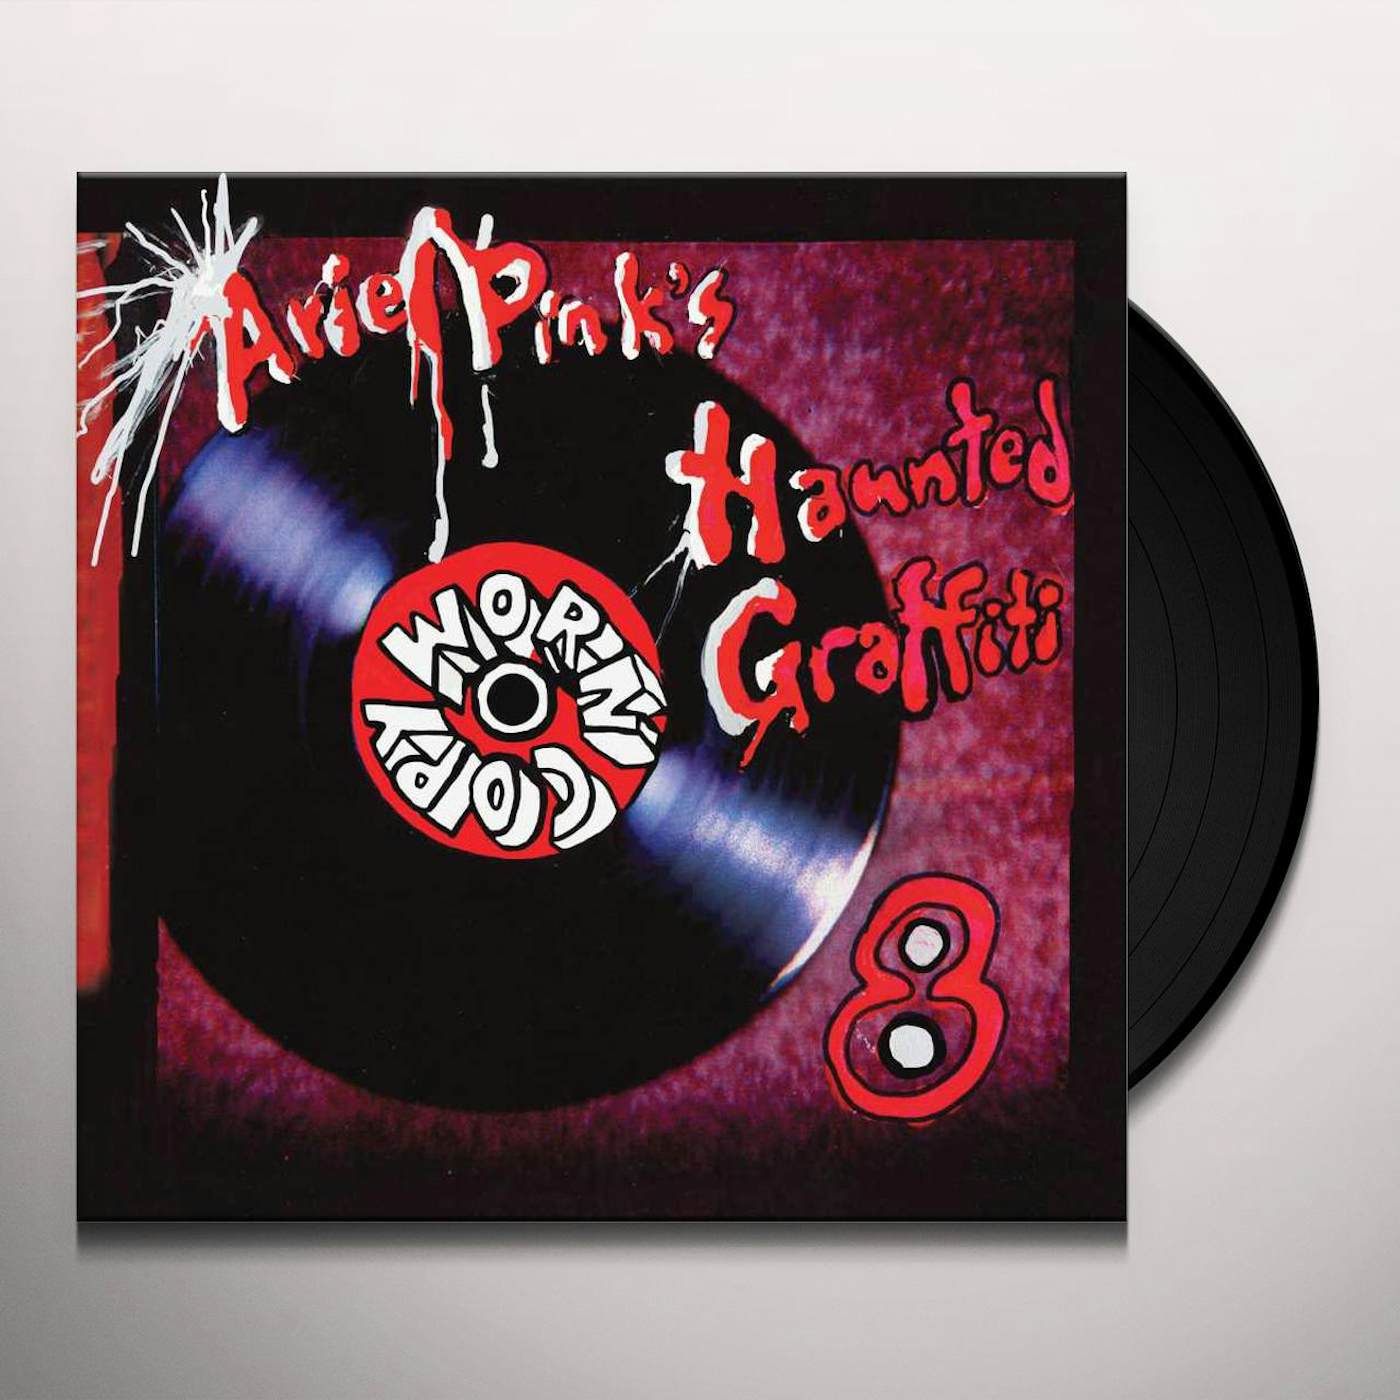 Ariel Pink's Haunted Graffiti WORN COPY (REMASTERED) (2LP/DL CARD/COVER REDESIGN BY HIM) Vinyl Record